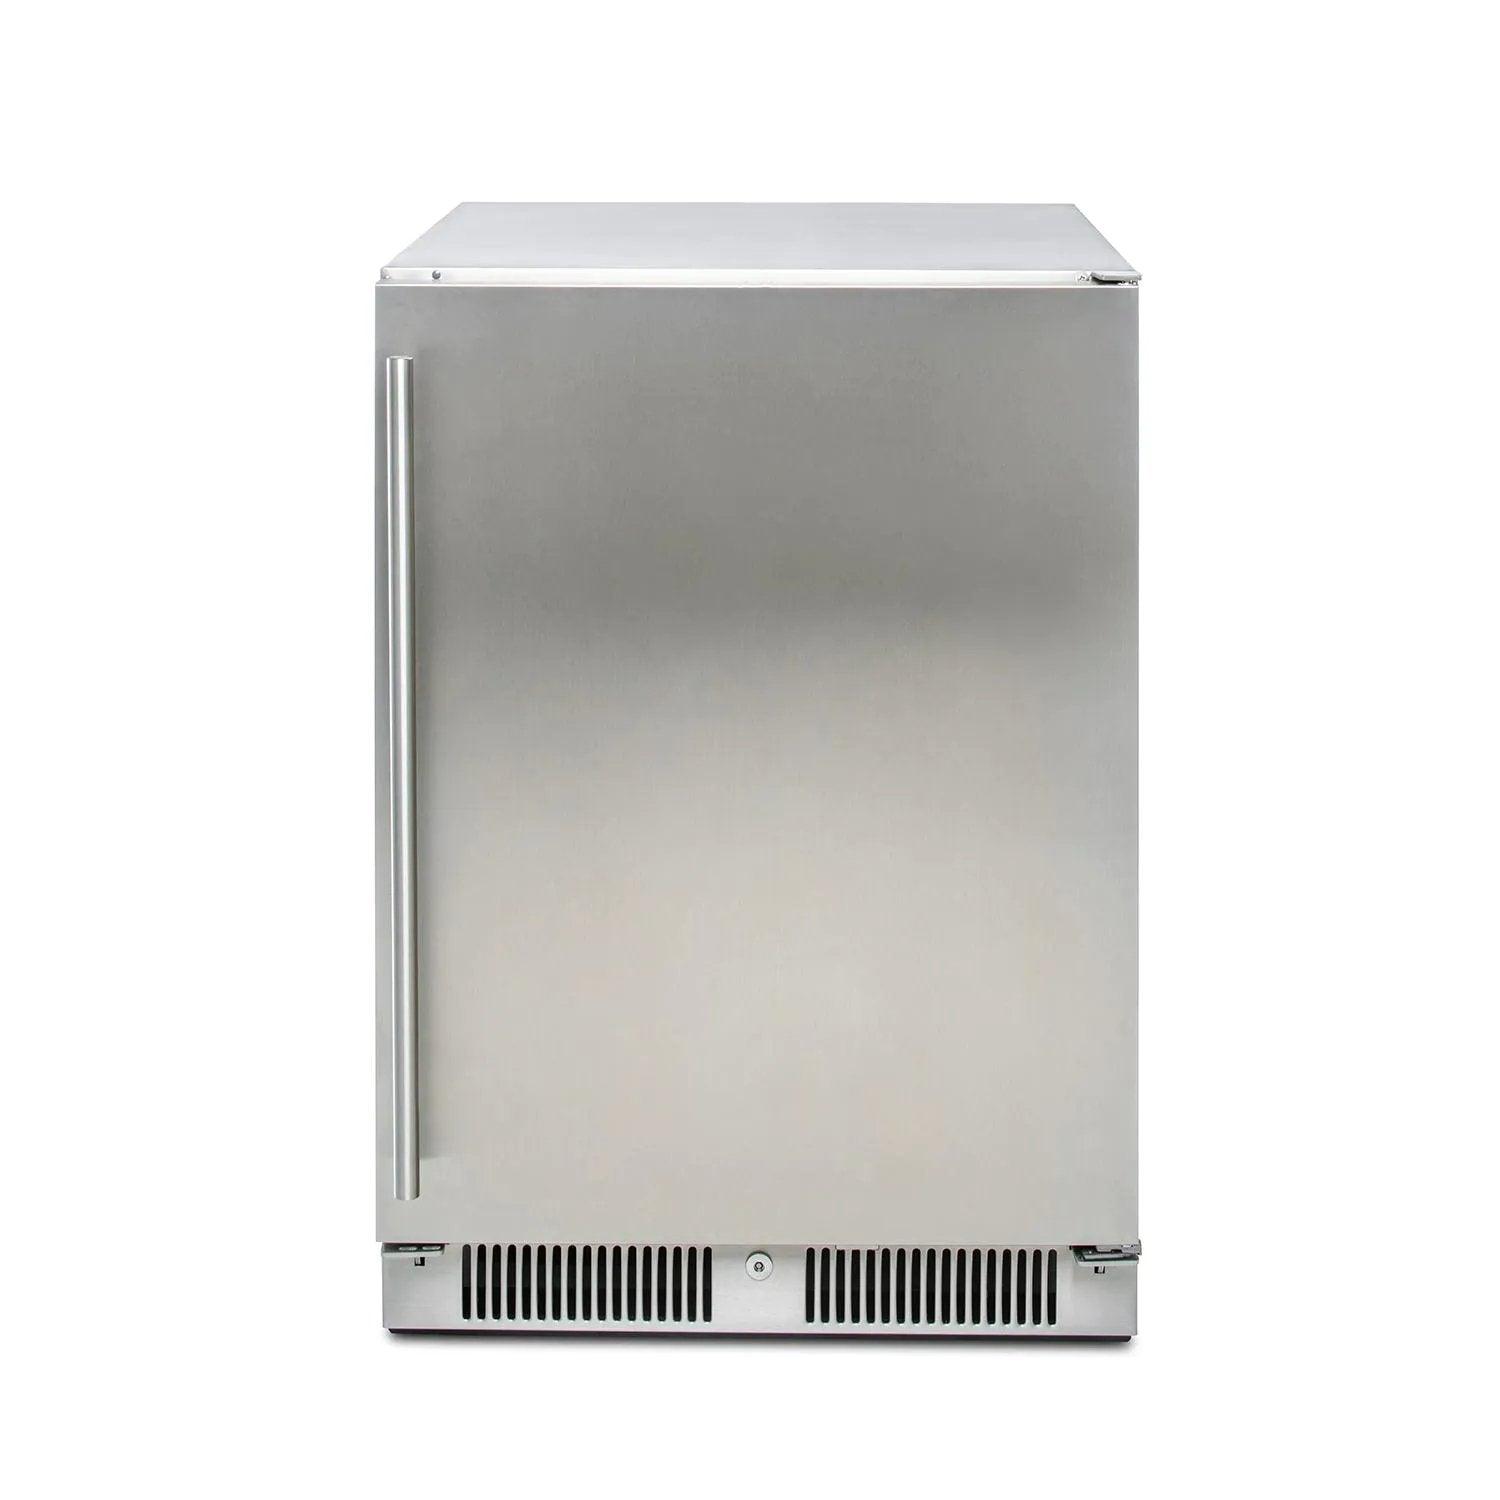 Elements Deluxe Compact Refrigerator